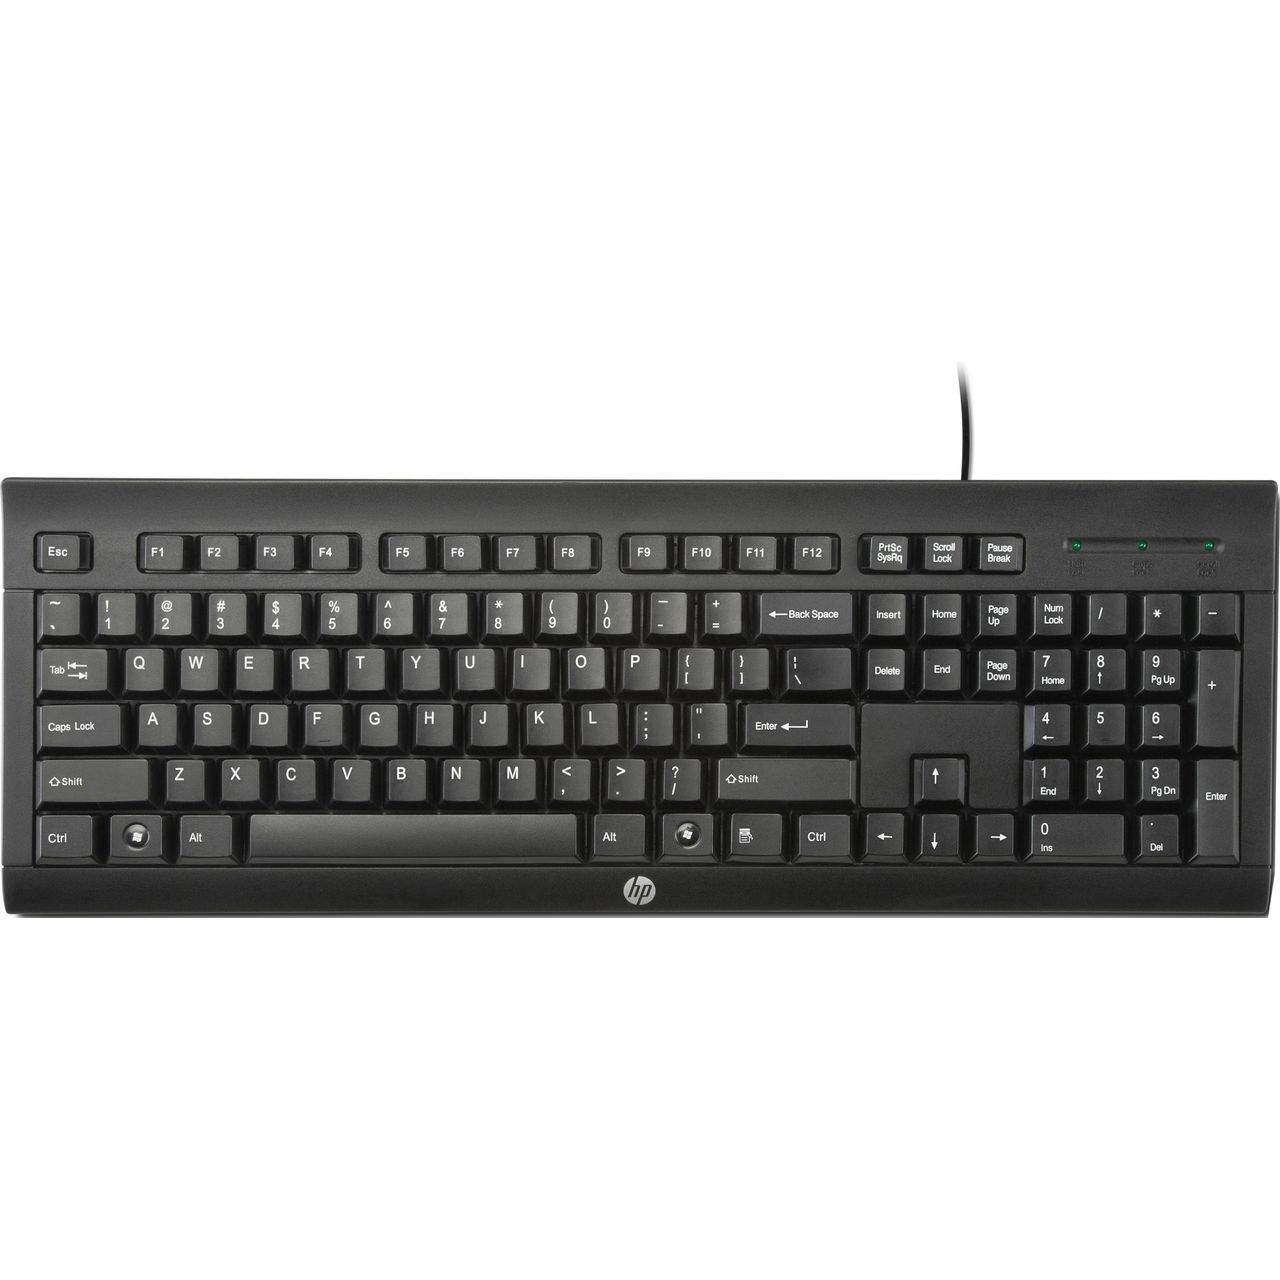 HP K1500 Wired USB Keyboard Review